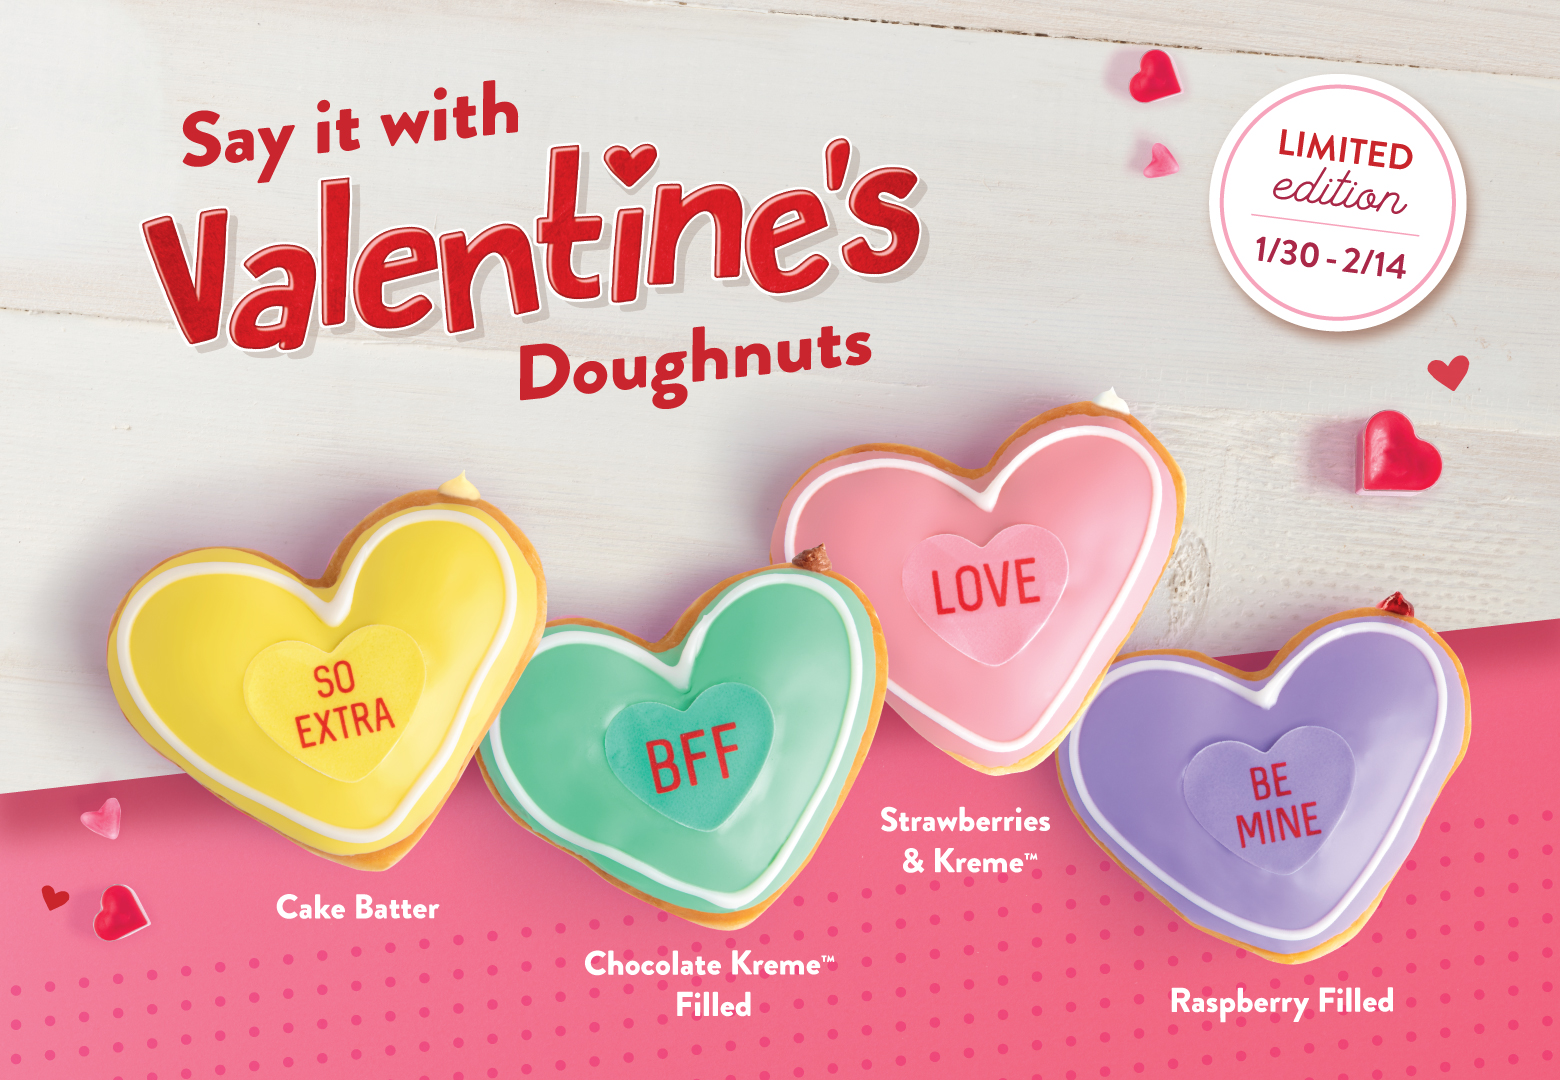 Say it with Valentines's conversation doughnuts: the yellow doughnut with red text says, "So Extra"; the green doughnut with red text says, "Love"; the pink doughnut with red text says, "BFF"; and the purple doughnut with red text says, "Be Mine".